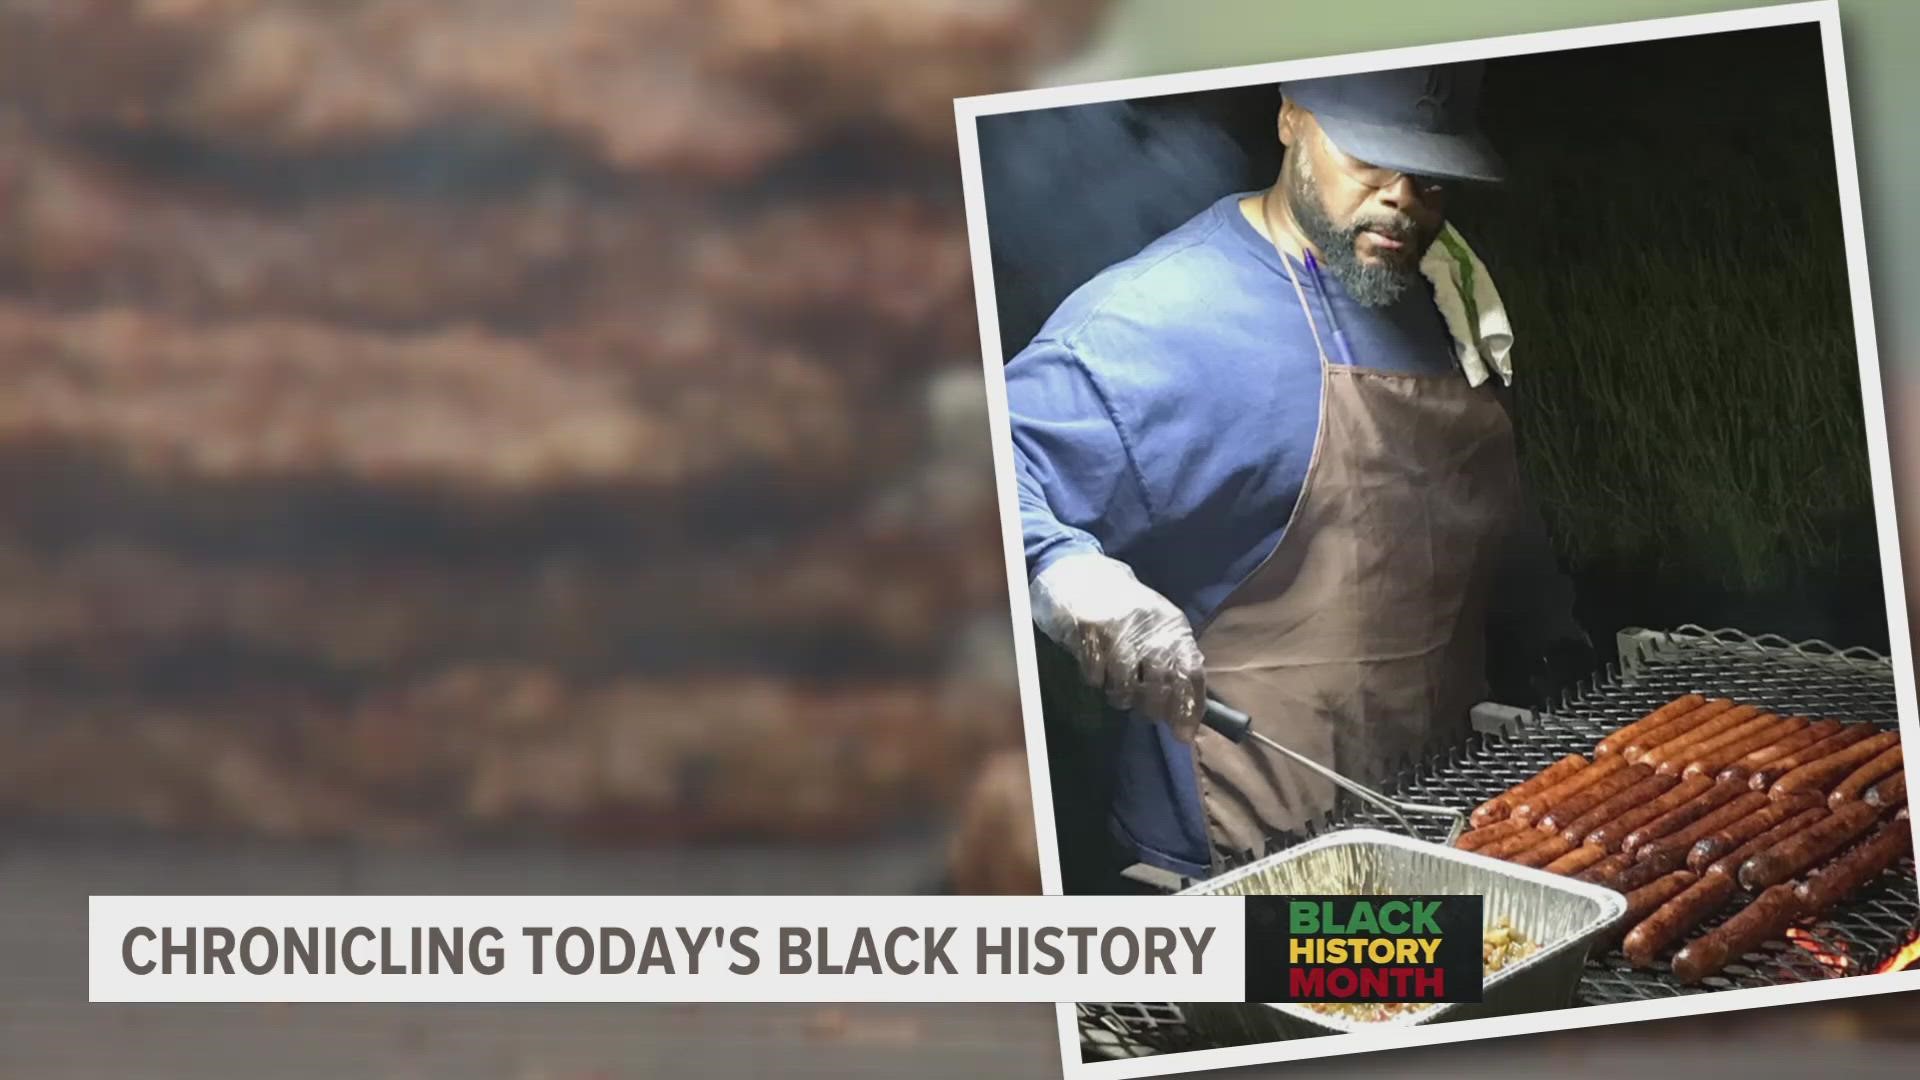 Derek Manning set out to visit 28 Black-owned businesses during Black History Month, and even he was surprised at how many he ended up making it to.